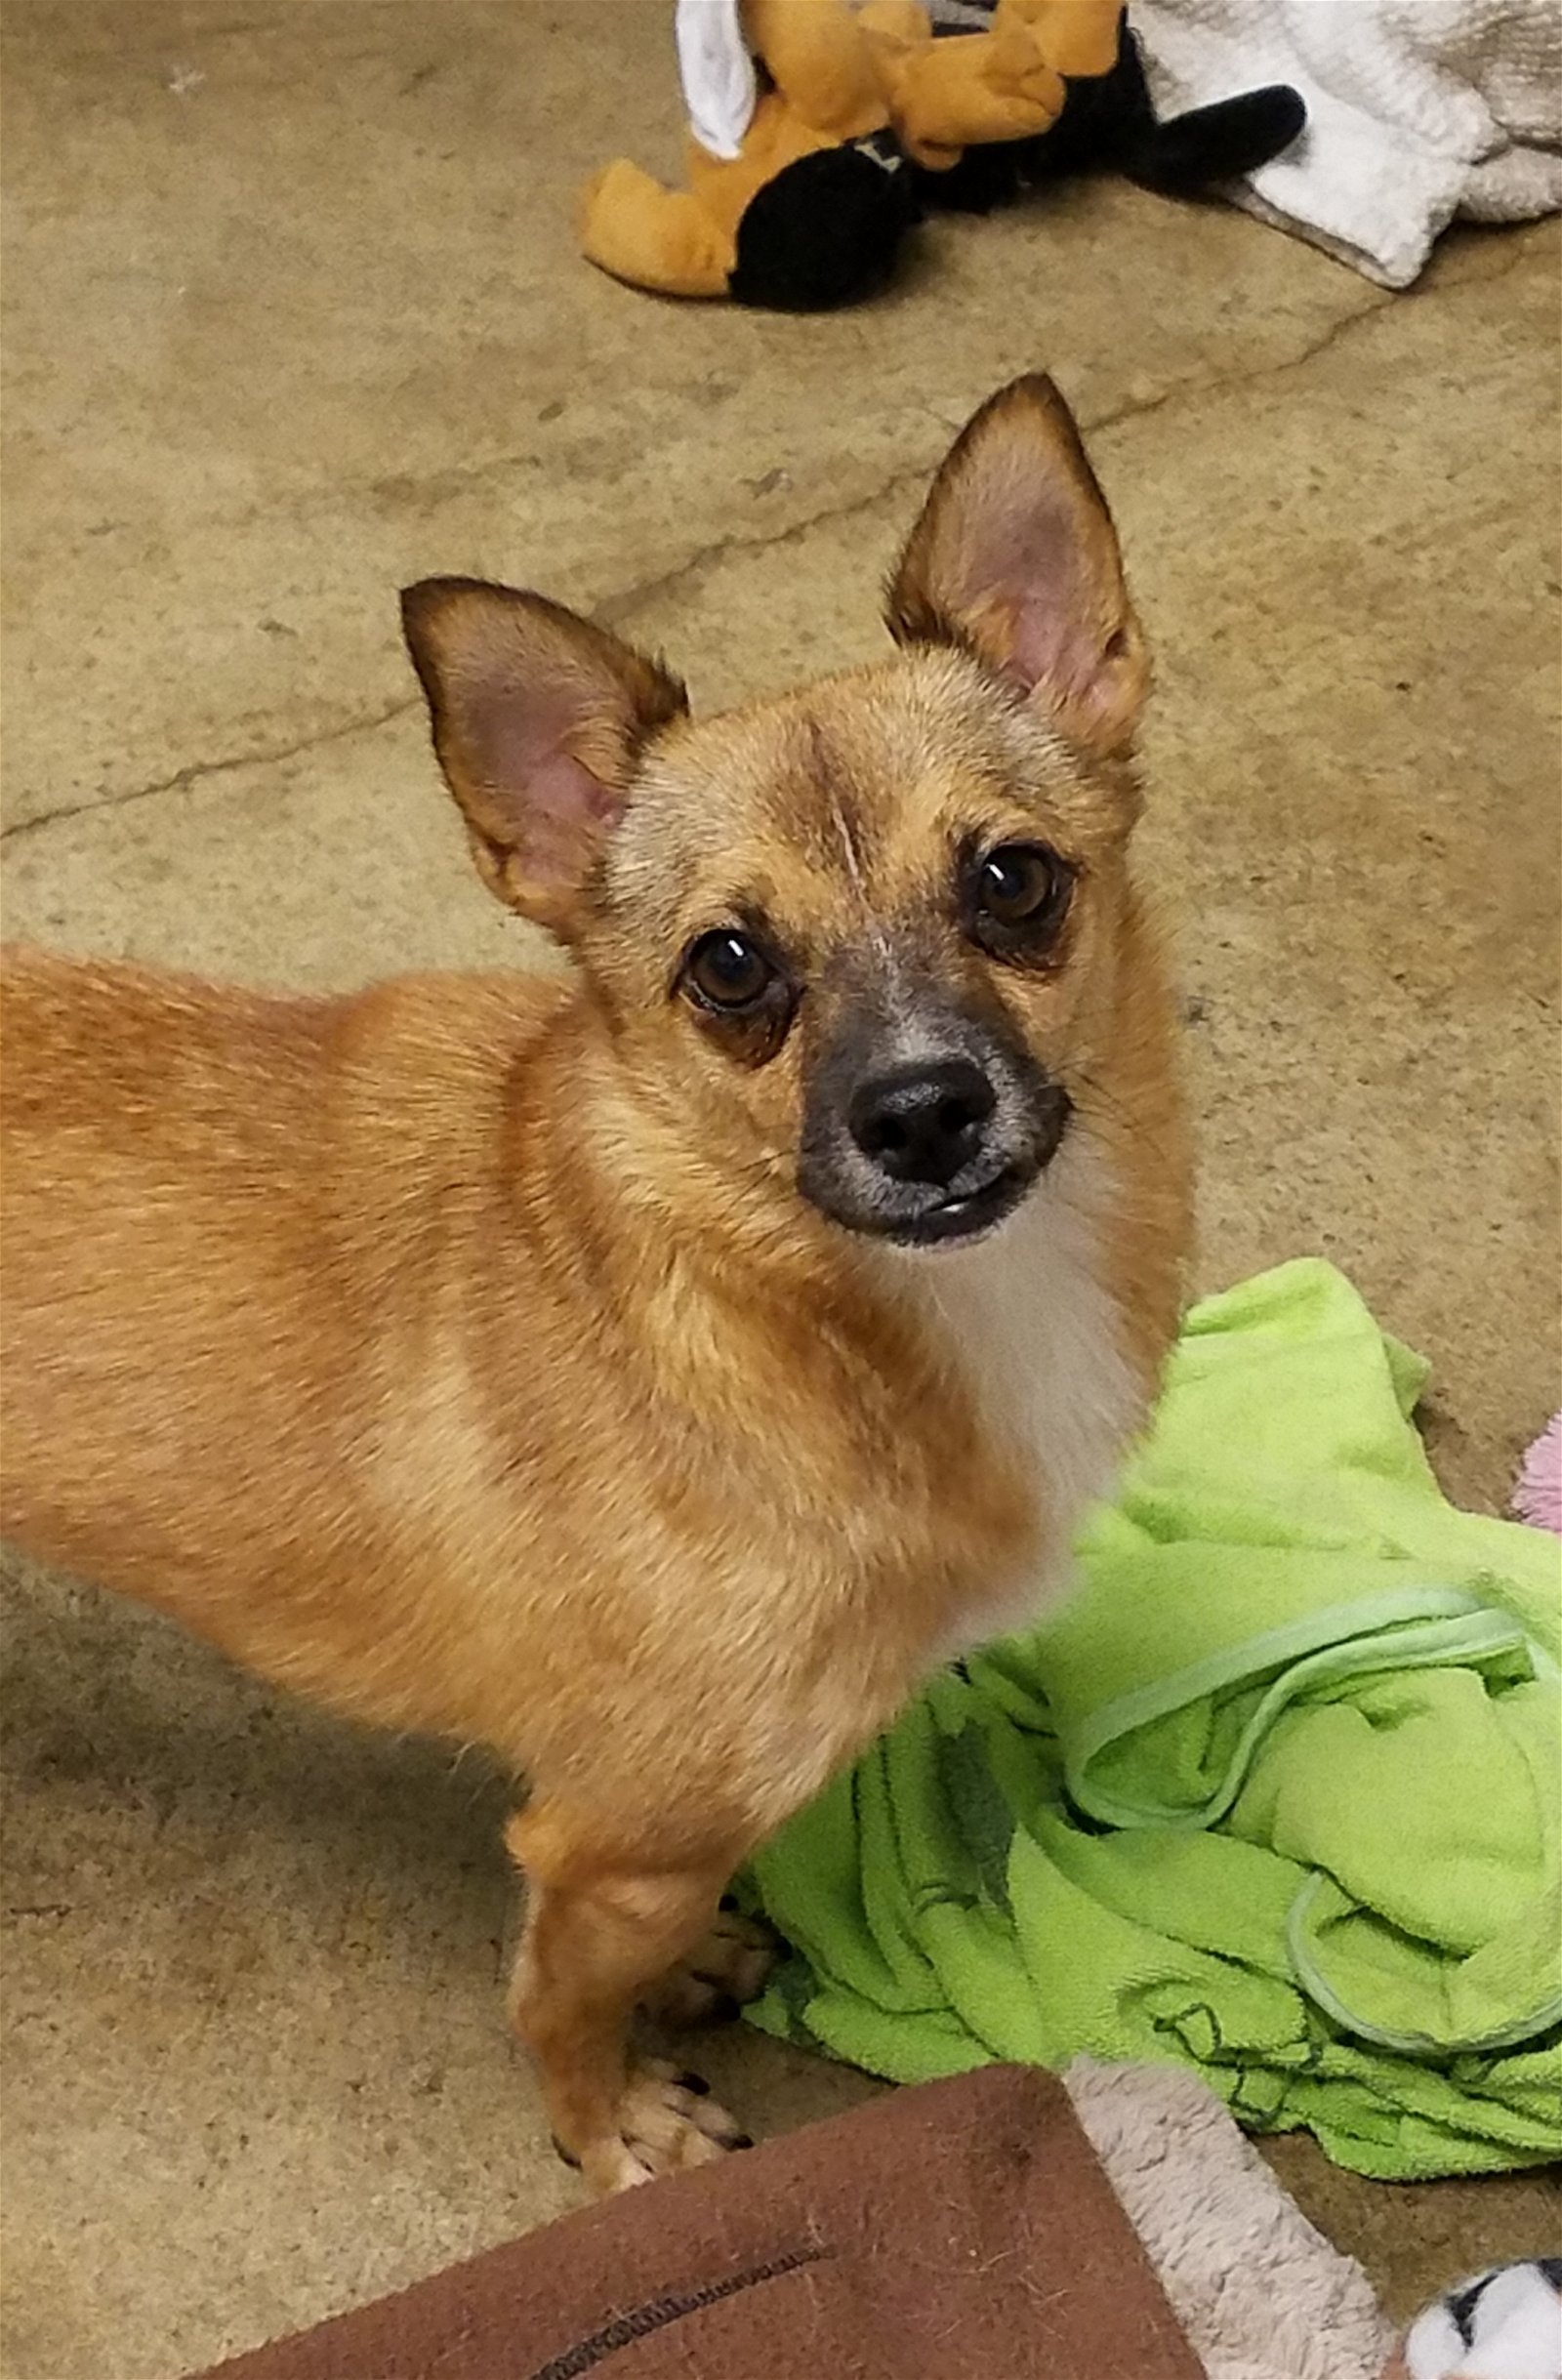 Dog for adoption - NA HUI, a Terrier & Chihuahua Mix in Agoura Hills, CA |  Petfinder